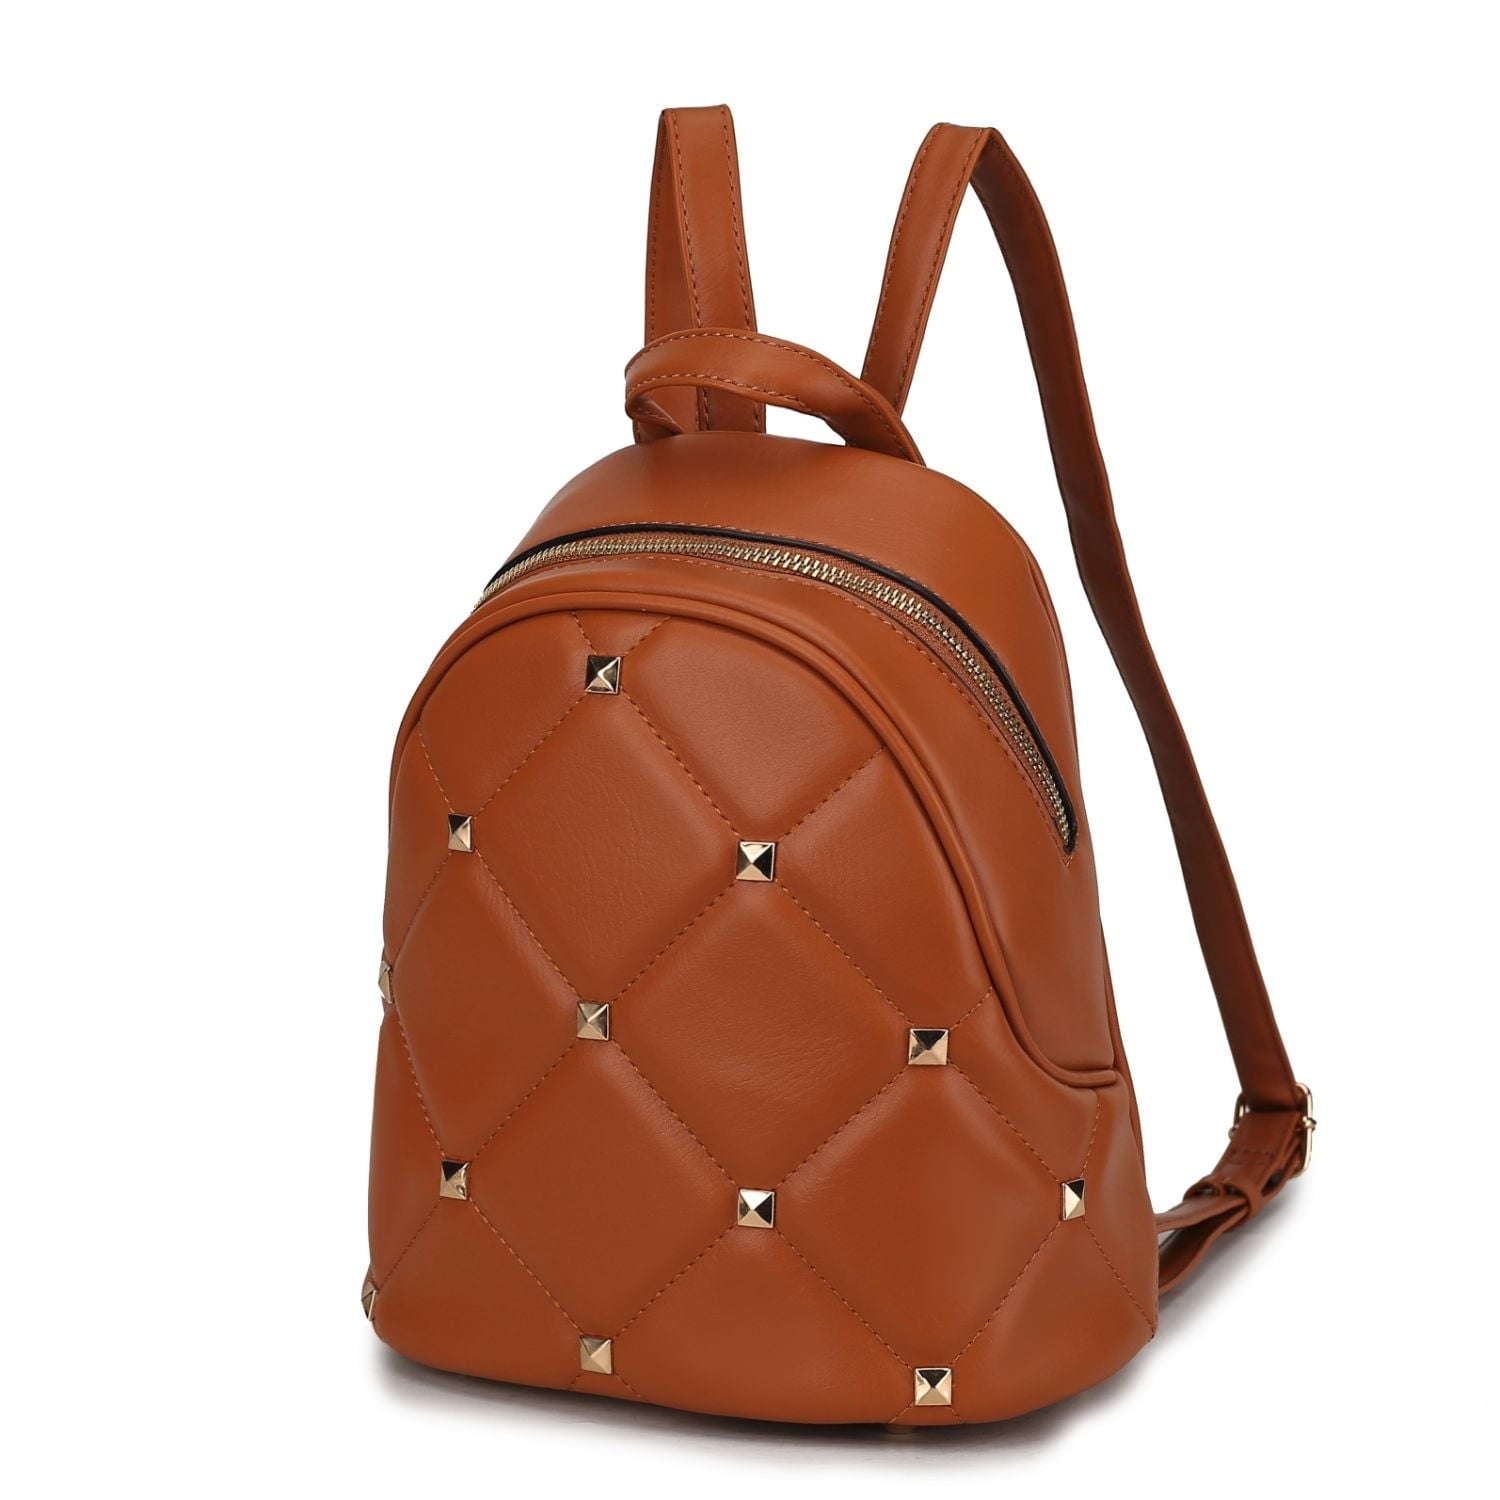 Backpack Purse With 2 Water Bottle Pockets, Vegan Leather Bag the LENOX  Vegan Purse in 4 Colors 